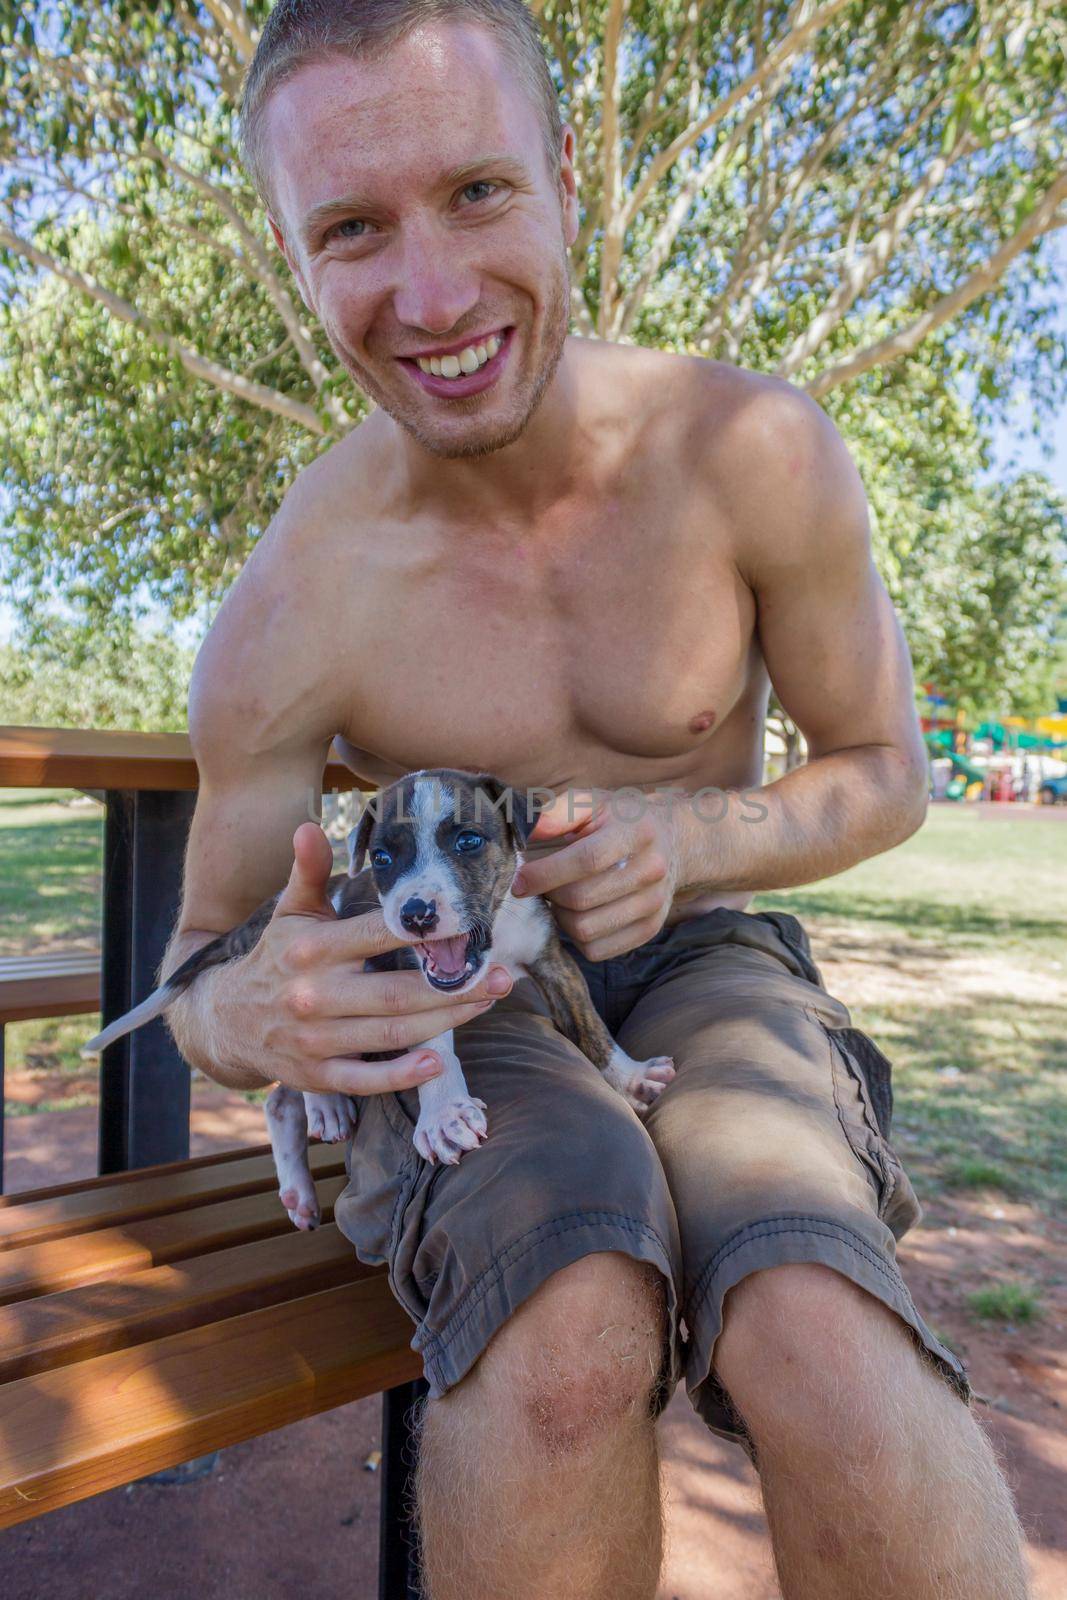 cute puppy sitting on girls leg, broome australia by bettercallcurry